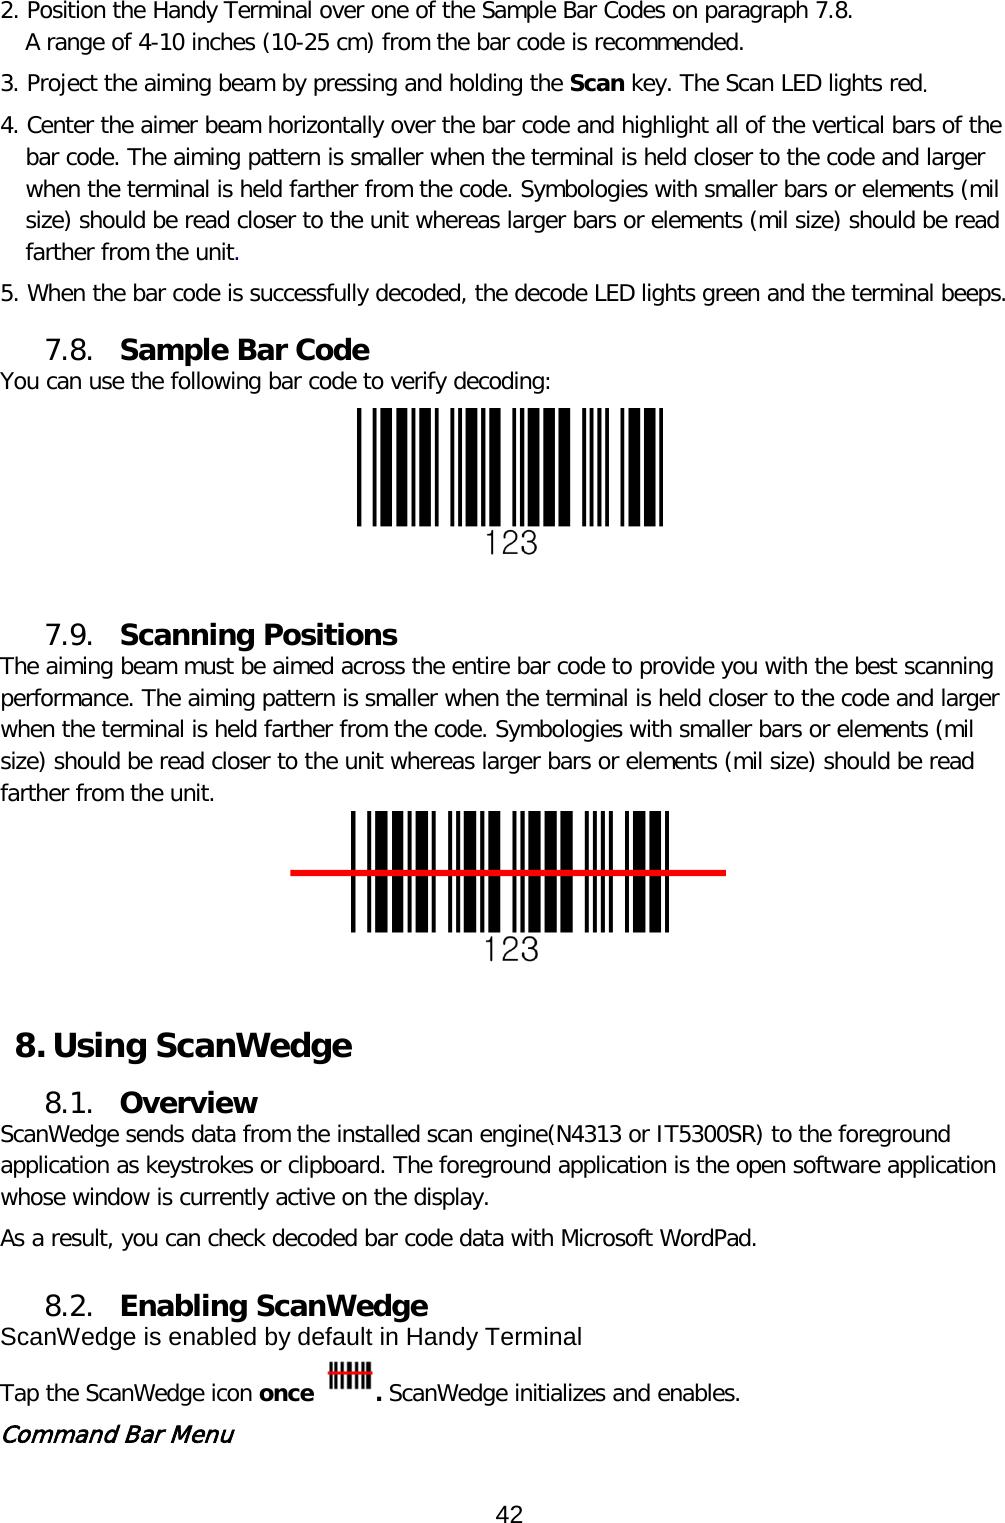 2. Position the Handy Terminal over one of the Sample Bar Codes on paragraph 7.8. A range of 4-10 inches (10-25 cm) from the bar code is recommended. 3. Project the aiming beam by pressing and holding the Scan key. The Scan LED lights red. 4. Center the aimer beam horizontally over the bar code and highlight all of the vertical bars of the bar code. The aiming pattern is smaller when the terminal is held closer to the code and larger when the terminal is held farther from the code. Symbologies with smaller bars or elements (mil size) should be read closer to the unit whereas larger bars or elements (mil size) should be read farther from the unit.  5. When the bar code is successfully decoded, the decode LED lights green and the terminal beeps.  7.8. Sample Bar Code You can use the following bar code to verify decoding:   7.9. Scanning Positions The aiming beam must be aimed across the entire bar code to provide you with the best scanning performance. The aiming pattern is smaller when the terminal is held closer to the code and larger when the terminal is held farther from the code. Symbologies with smaller bars or elements (mil size) should be read closer to the unit whereas larger bars or elements (mil size) should be read farther from the unit.   8. Using ScanWedge 8.1. Overview ScanWedge sends data from the installed scan engine(N4313 or IT5300SR) to the foreground application as keystrokes or clipboard. The foreground application is the open software application whose window is currently active on the display.  As a result, you can check decoded bar code data with Microsoft WordPad.  8.2. Enabling ScanWedge ScanWedge is enabled by default in Handy Terminal Tap the ScanWedge icon once  . ScanWedge initializes and enables. Command Bar Menu 42  